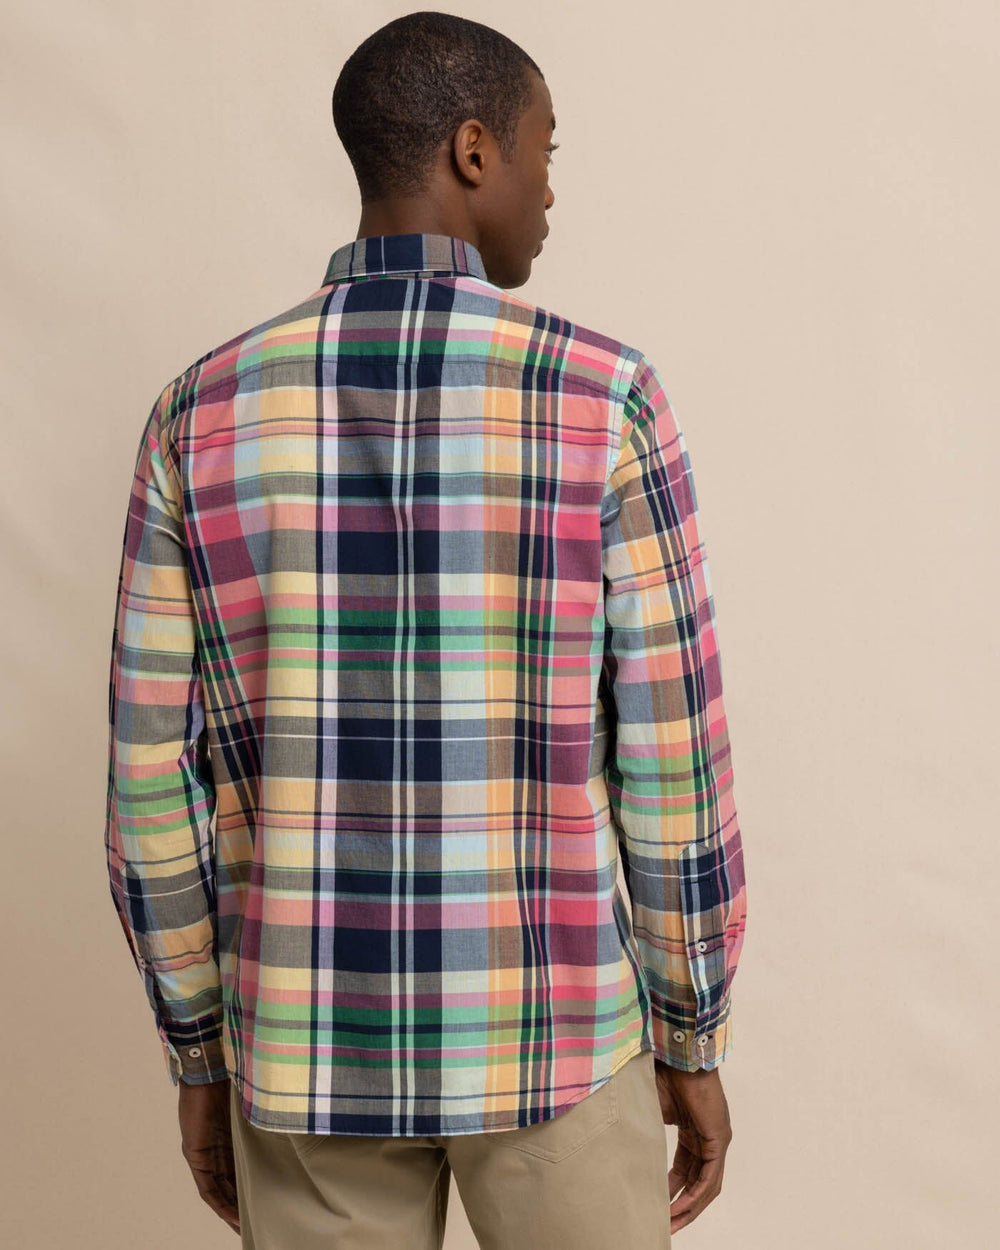 The back view of the Southern Tide Harkers Island Madras Plaid Long Sleeve Sport Shirt by Southern Tide - Dress Blue